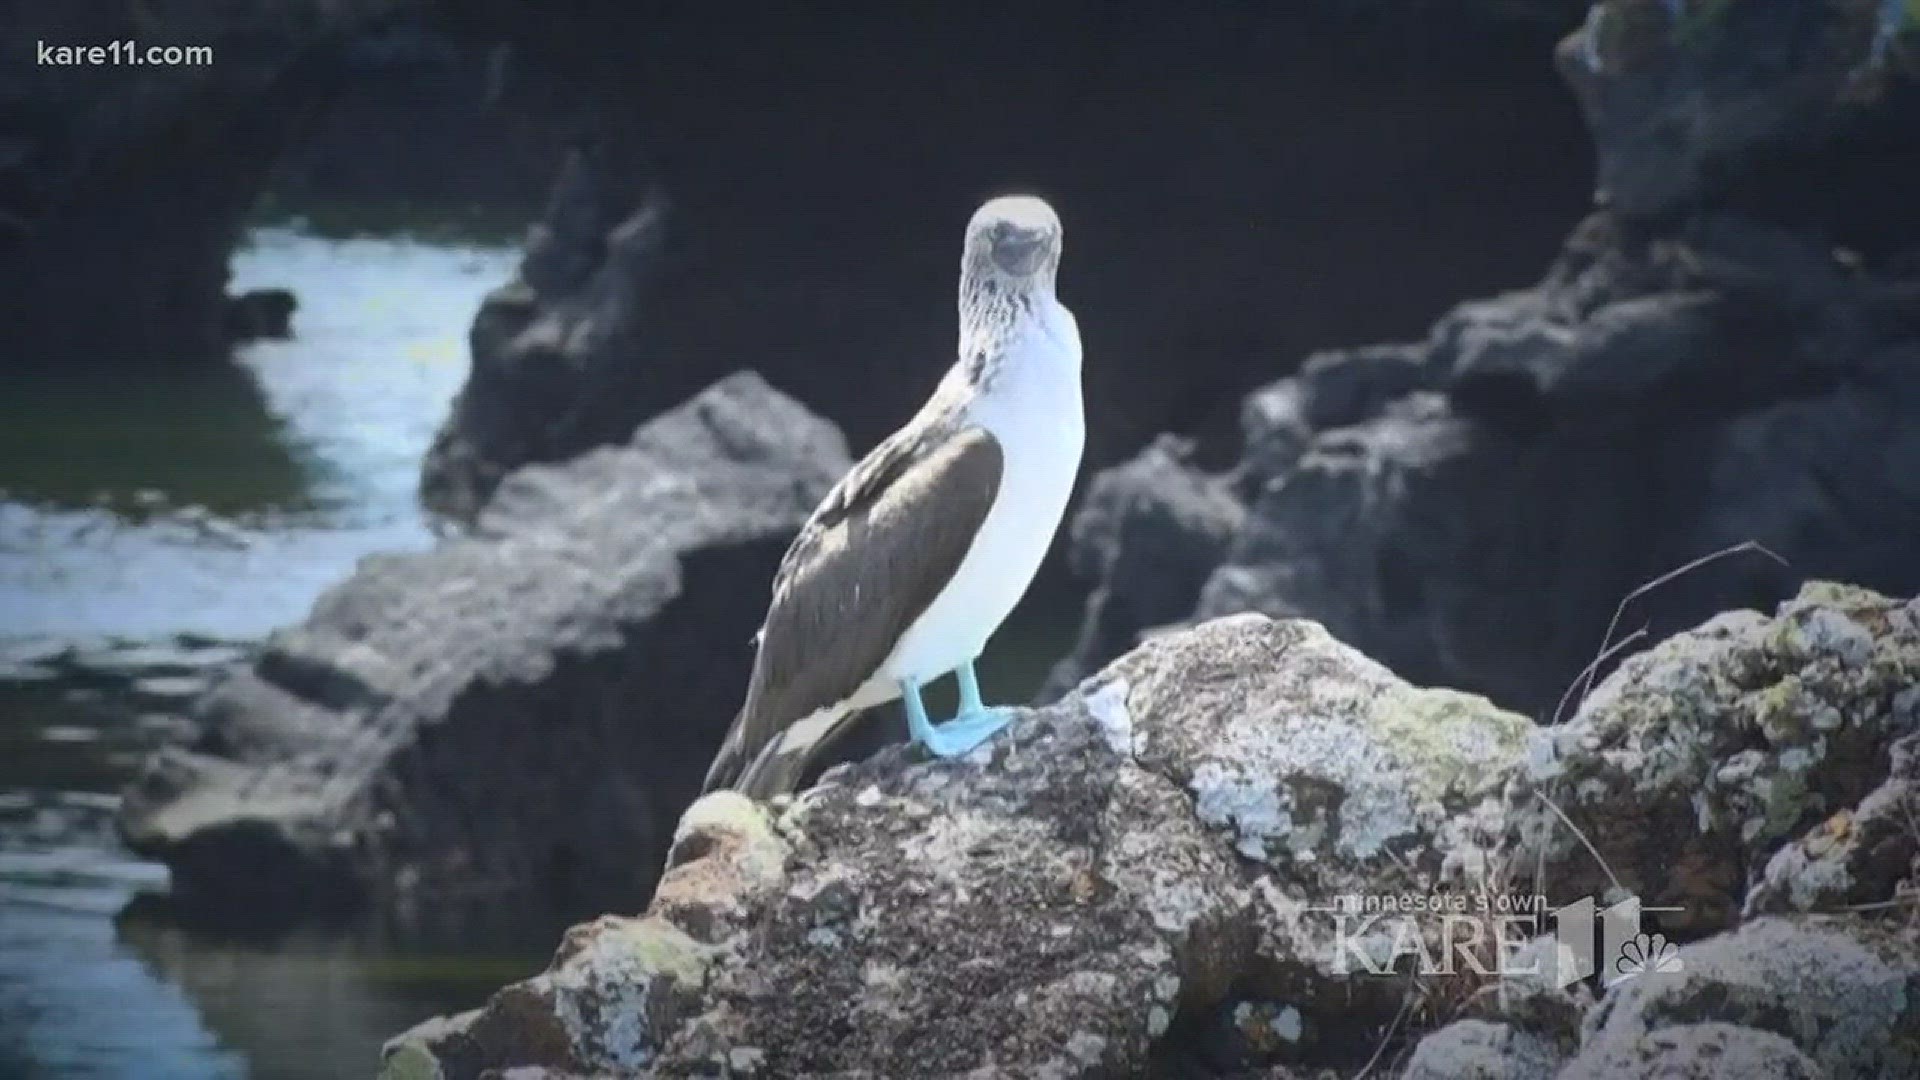 Sven revisits his trip to the Galapagos Islands to talk about the declining numbers of the blue-footed booby population.